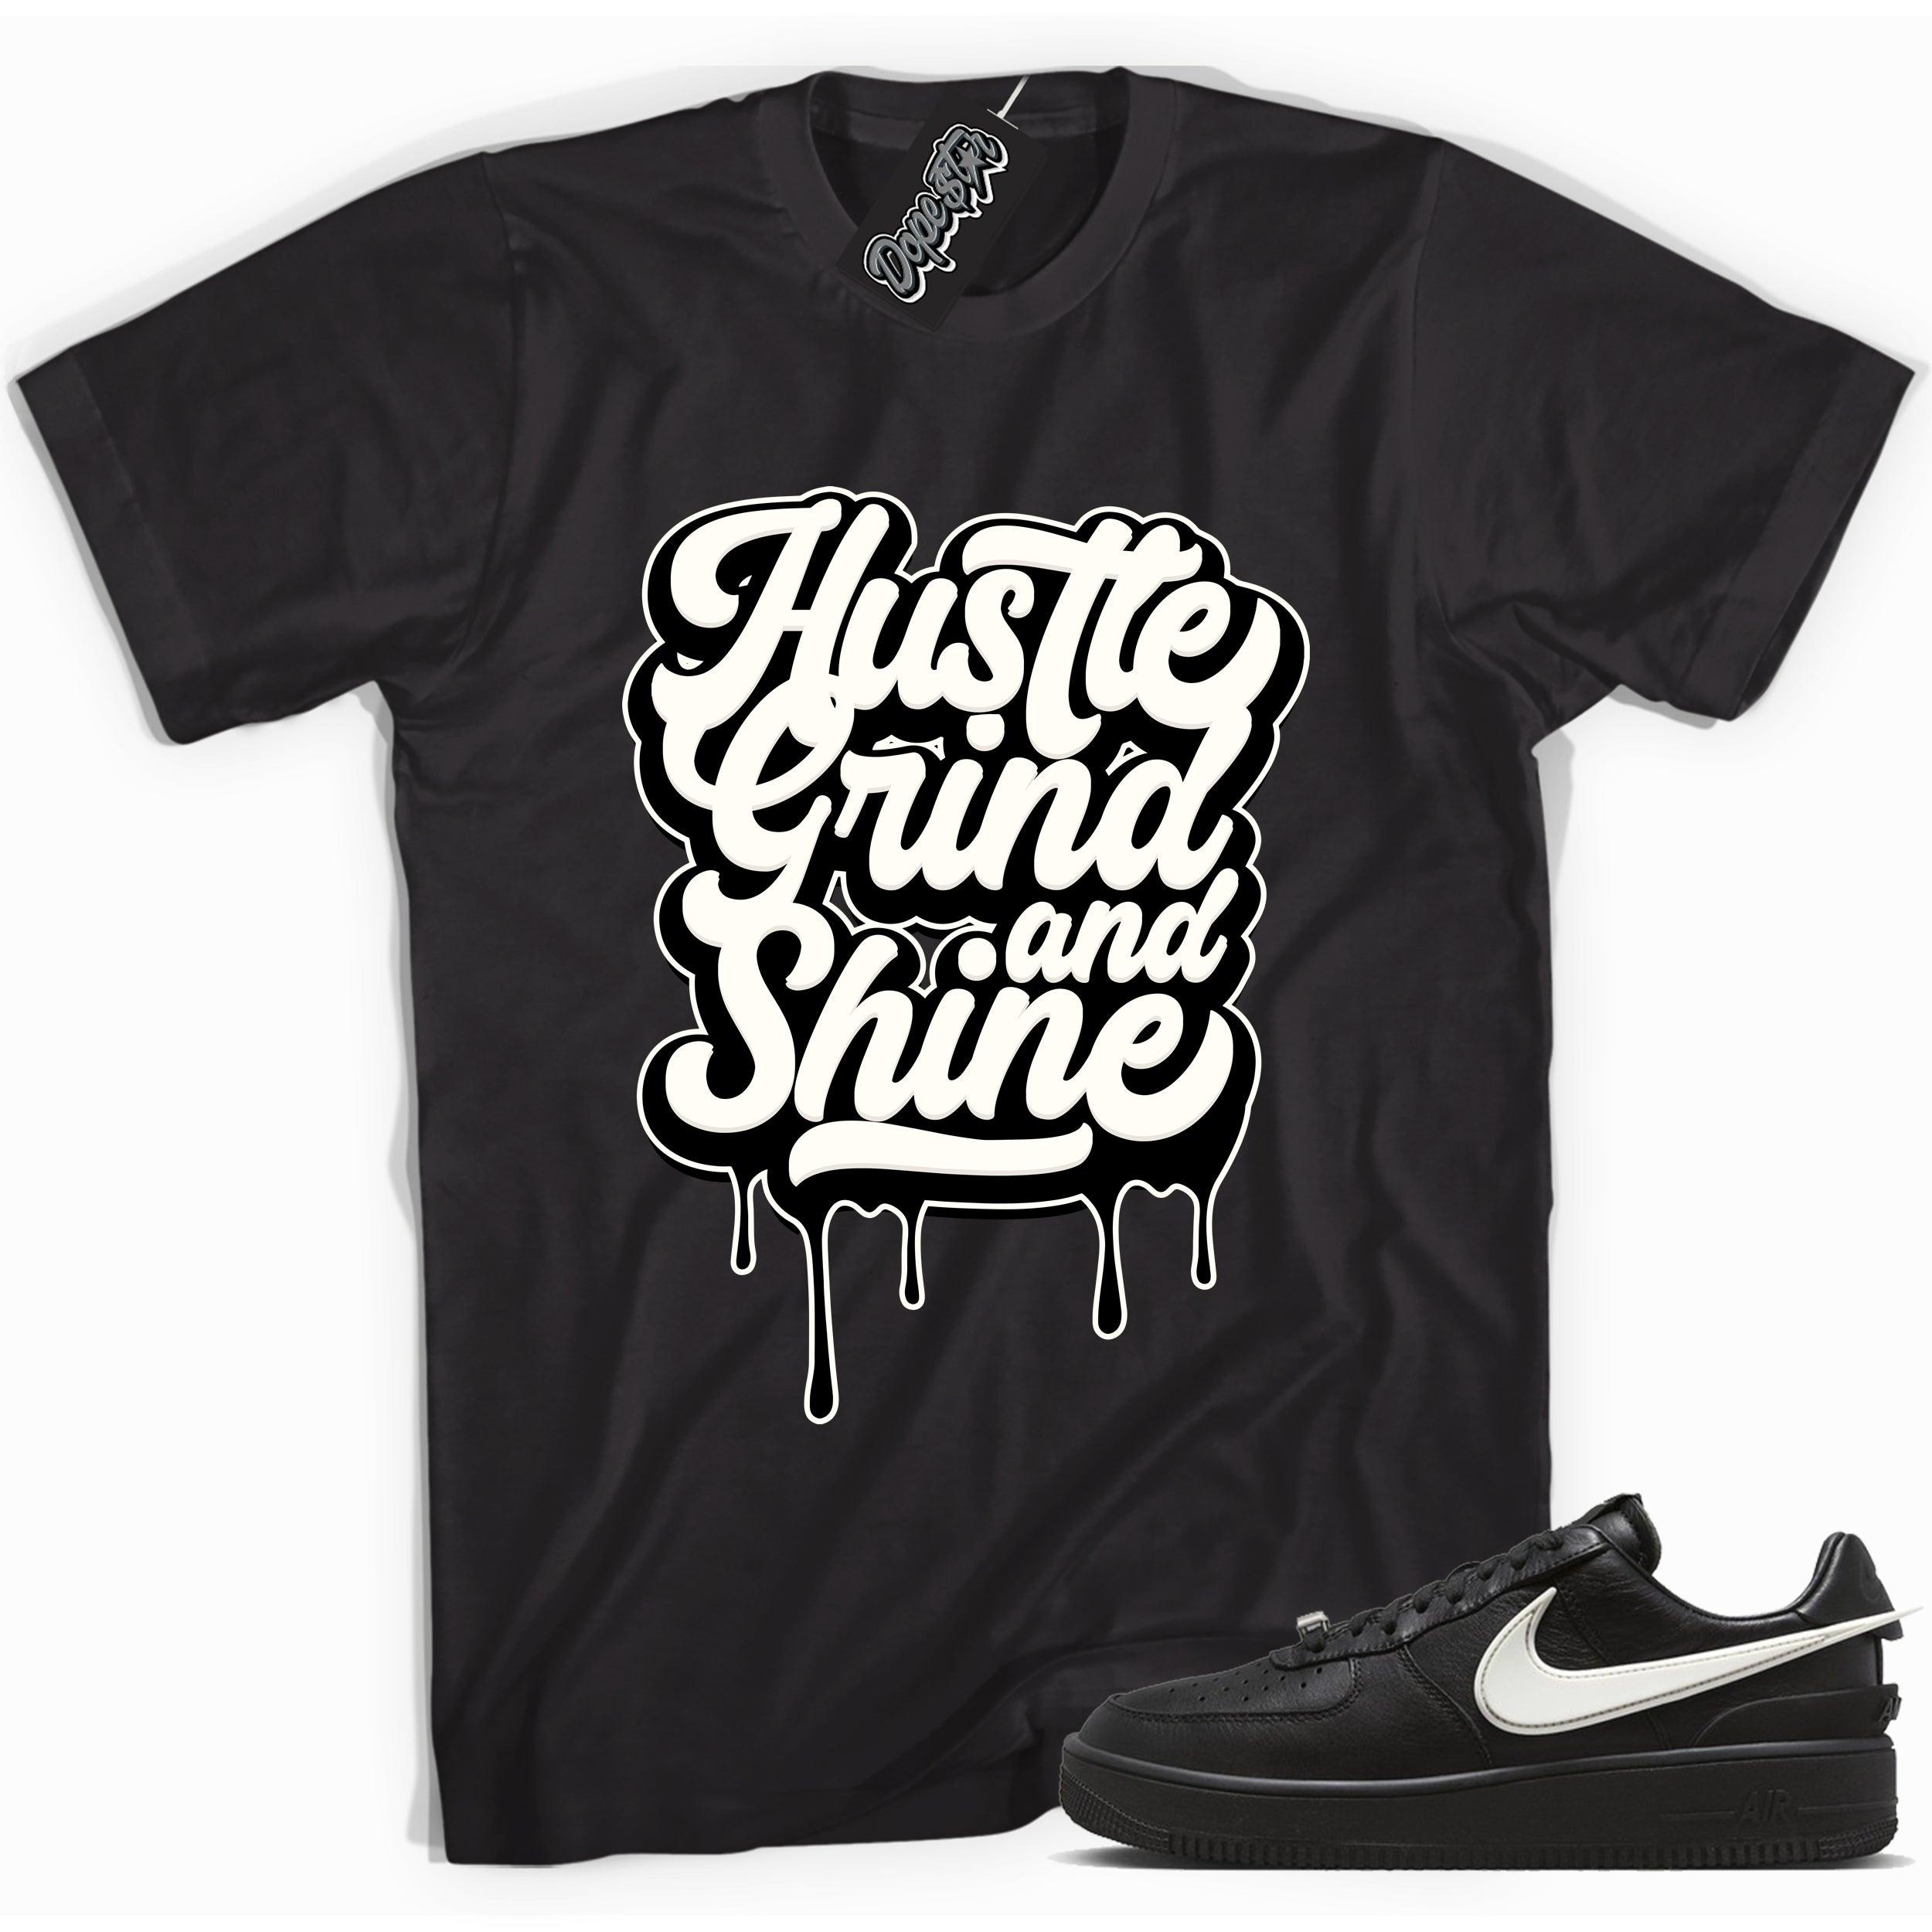 Cool black graphic tee with 'hustle grind and shine ' print, that perfectly matches Nike Air Force 1 Low SP Ambush Phantom sneakers.